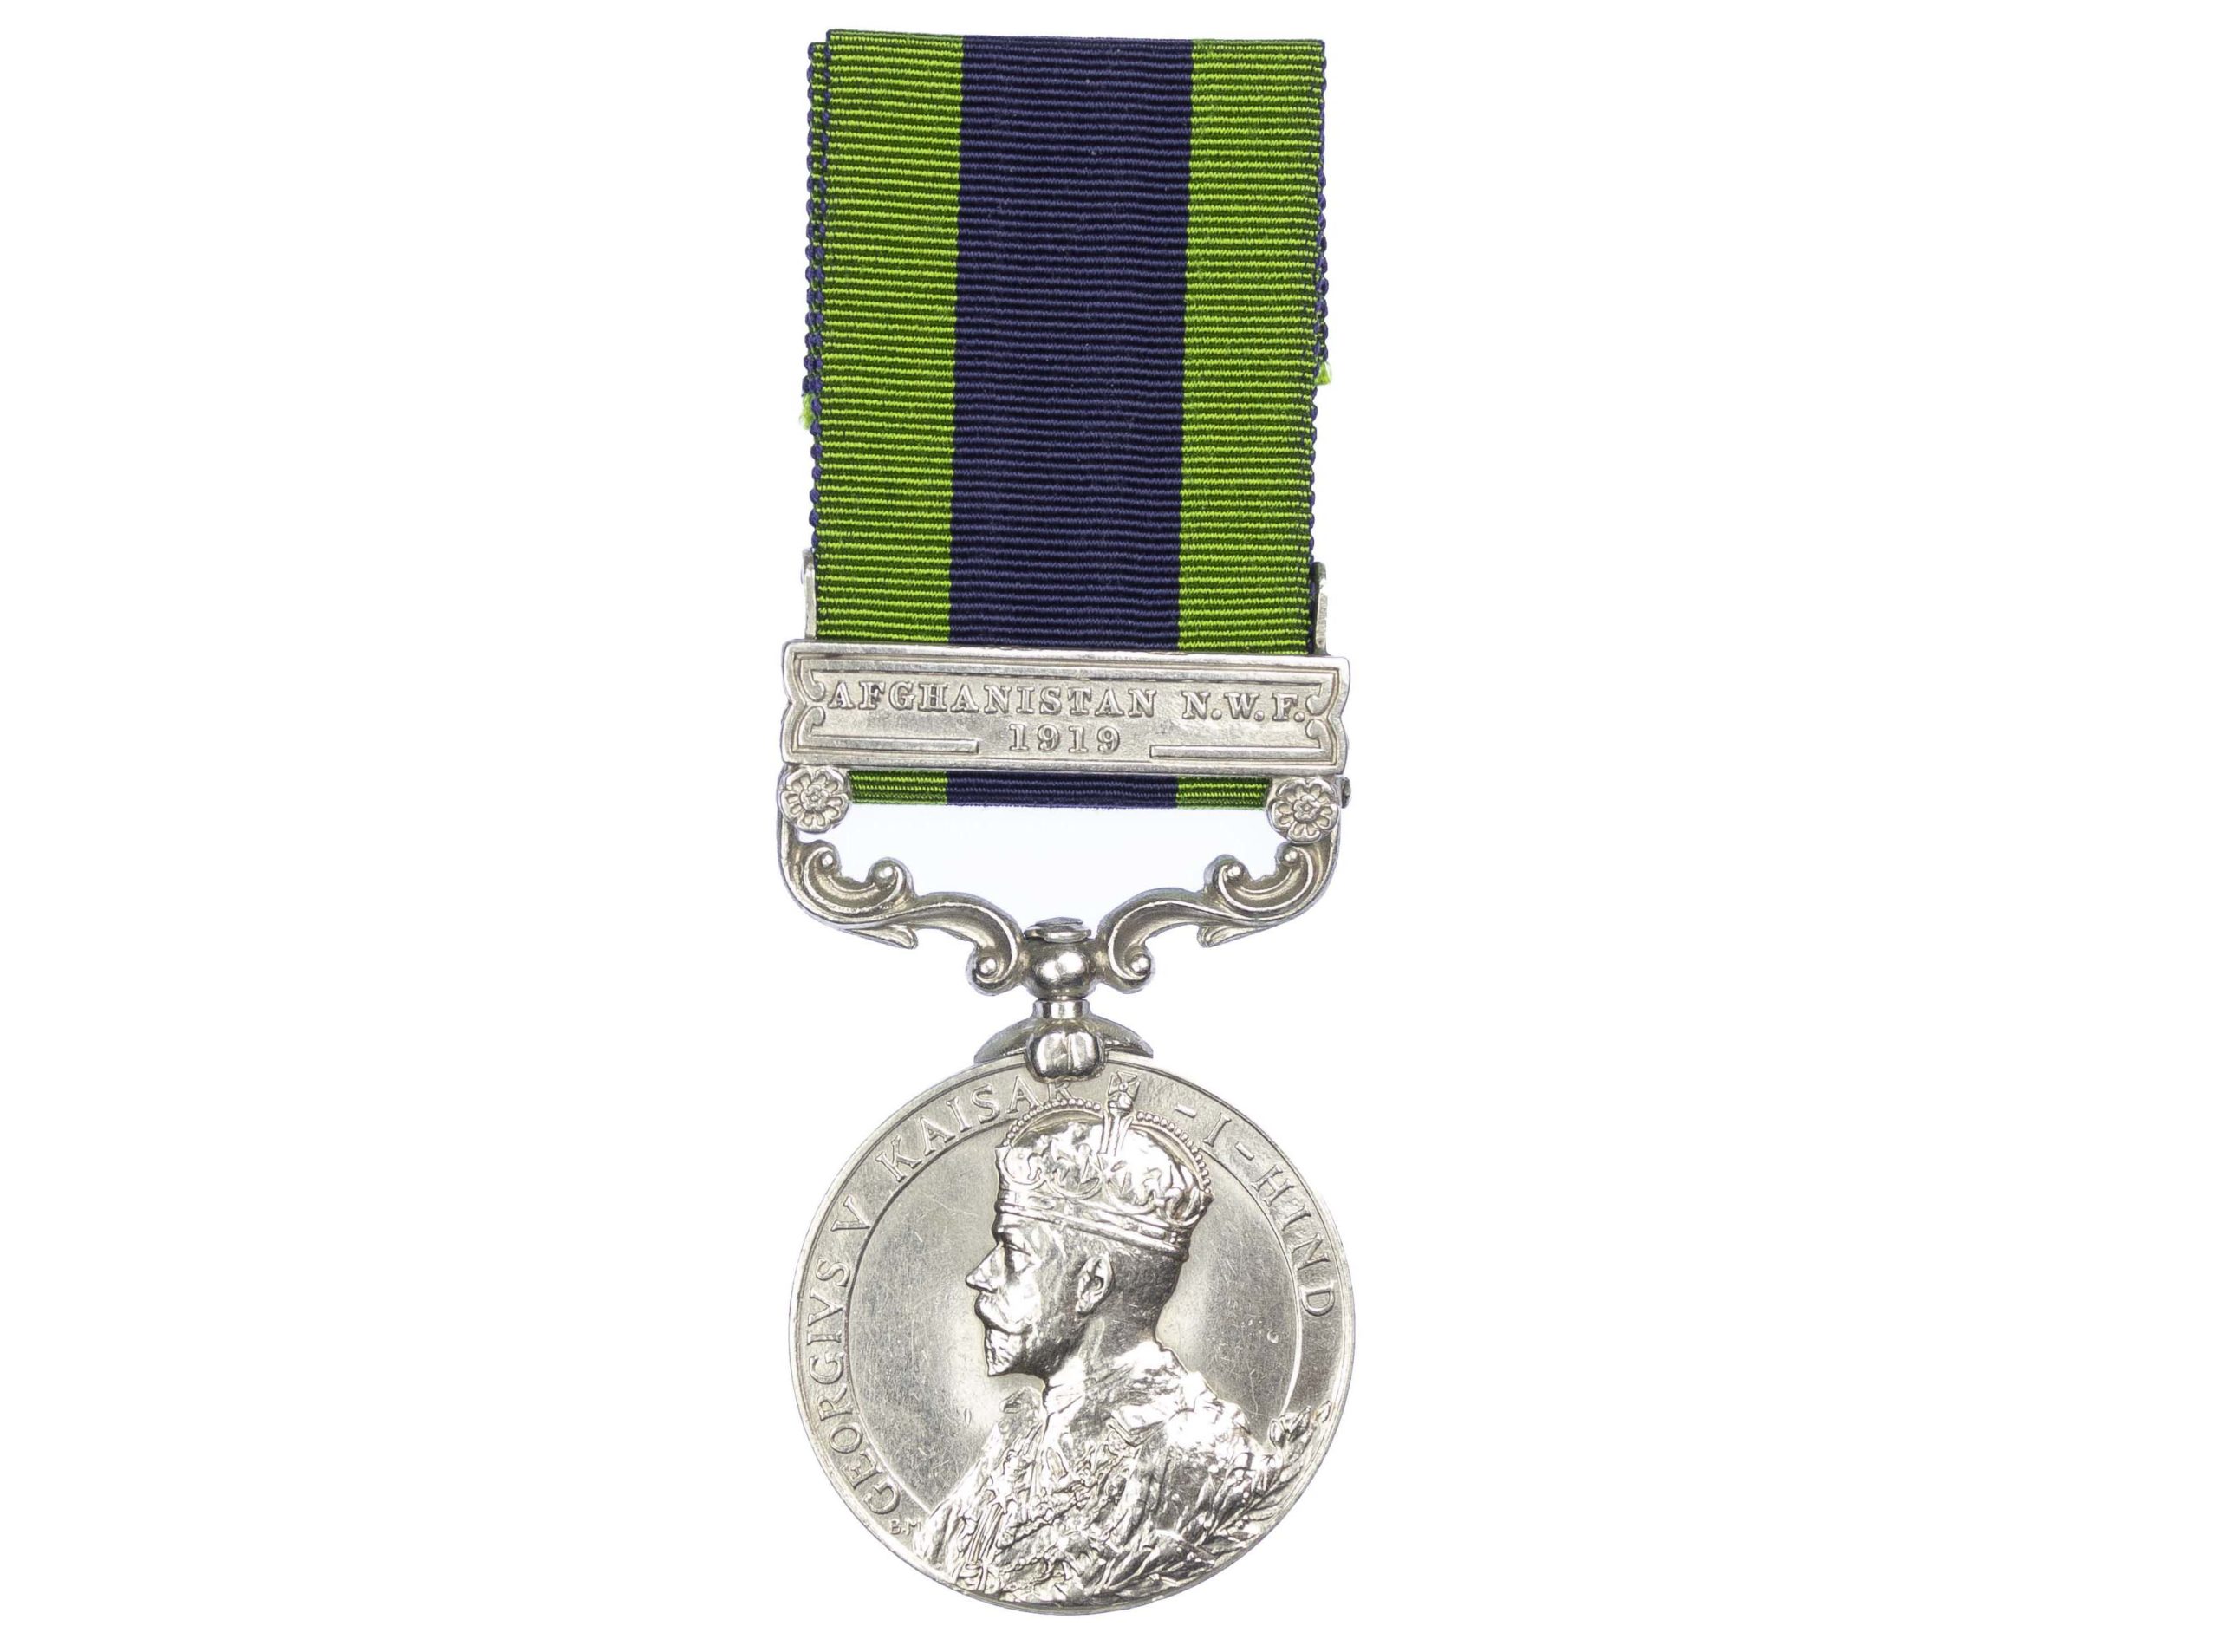 India General Service Medal 1908-35, one clasp, Afghanistan N.W.F. 1919 to Sepoy Sant Ram